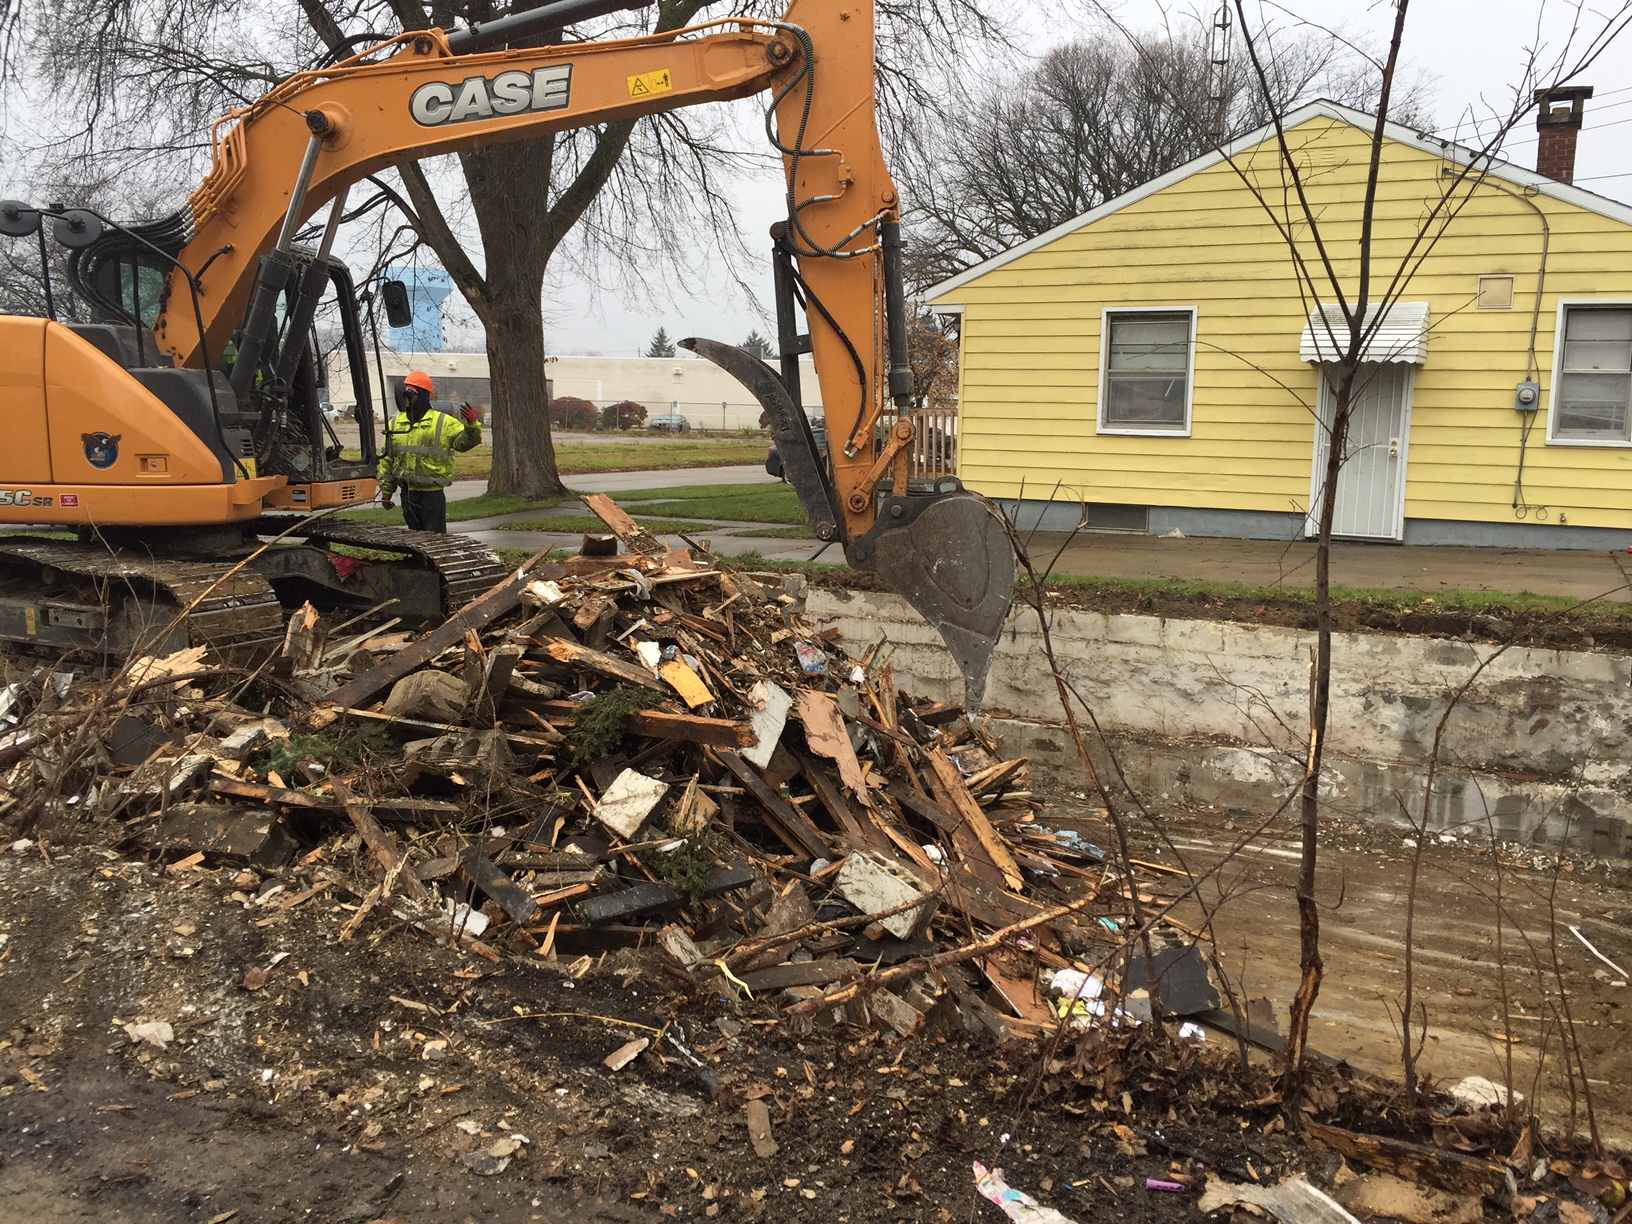 Contractors demolished a frame house last week that once stood at 3706 Van Buren Street in Flint. About 30 percent of the city's blighted houses ‒ 1,766 at last count ‒ were demolished with federal grant funds. Another round of funding recently announced will take down 900 more vacant houses in Flint. (Bridge photo by Chastity Pratt Dawsey)